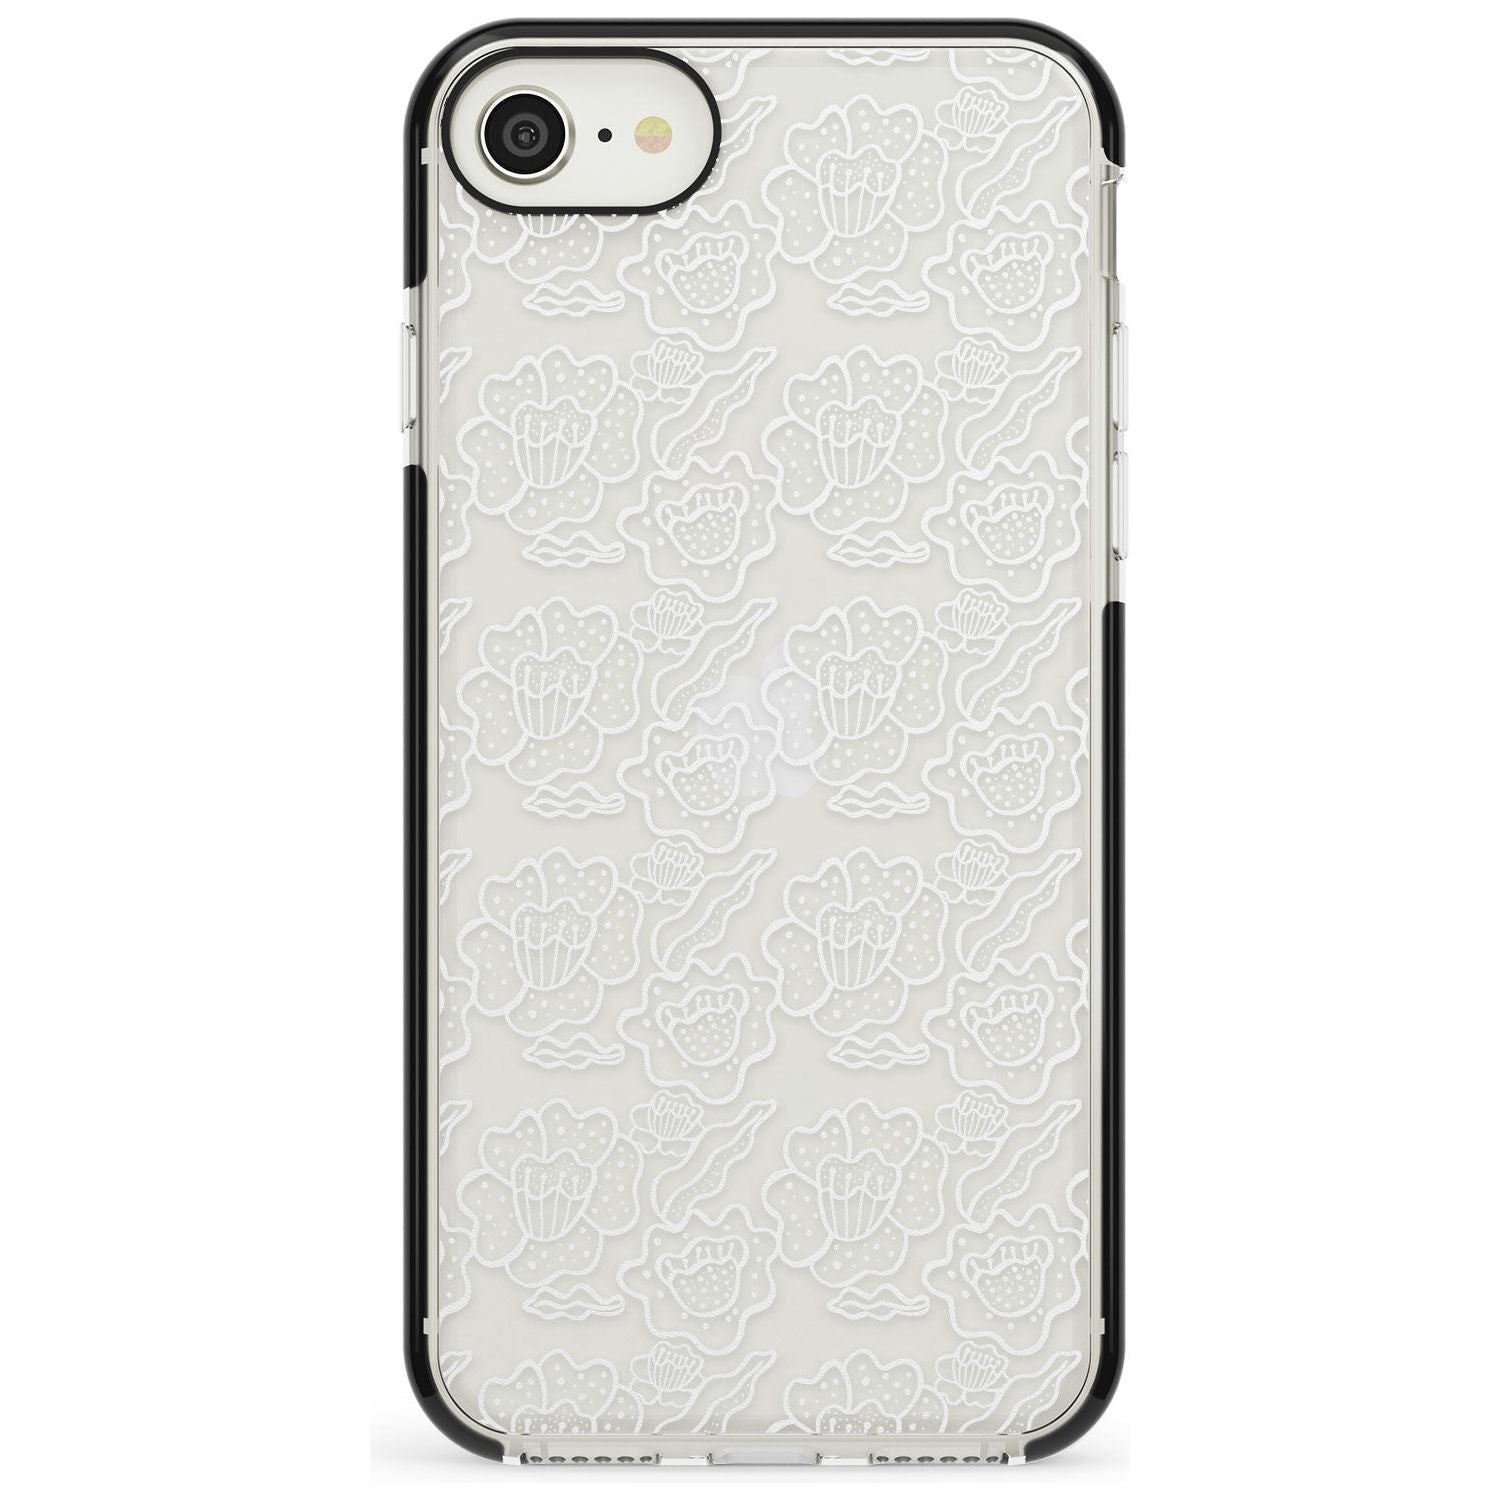 Funky Floral Patterns White on Clear Black Impact Phone Case for iPhone SE 8 7 Plus